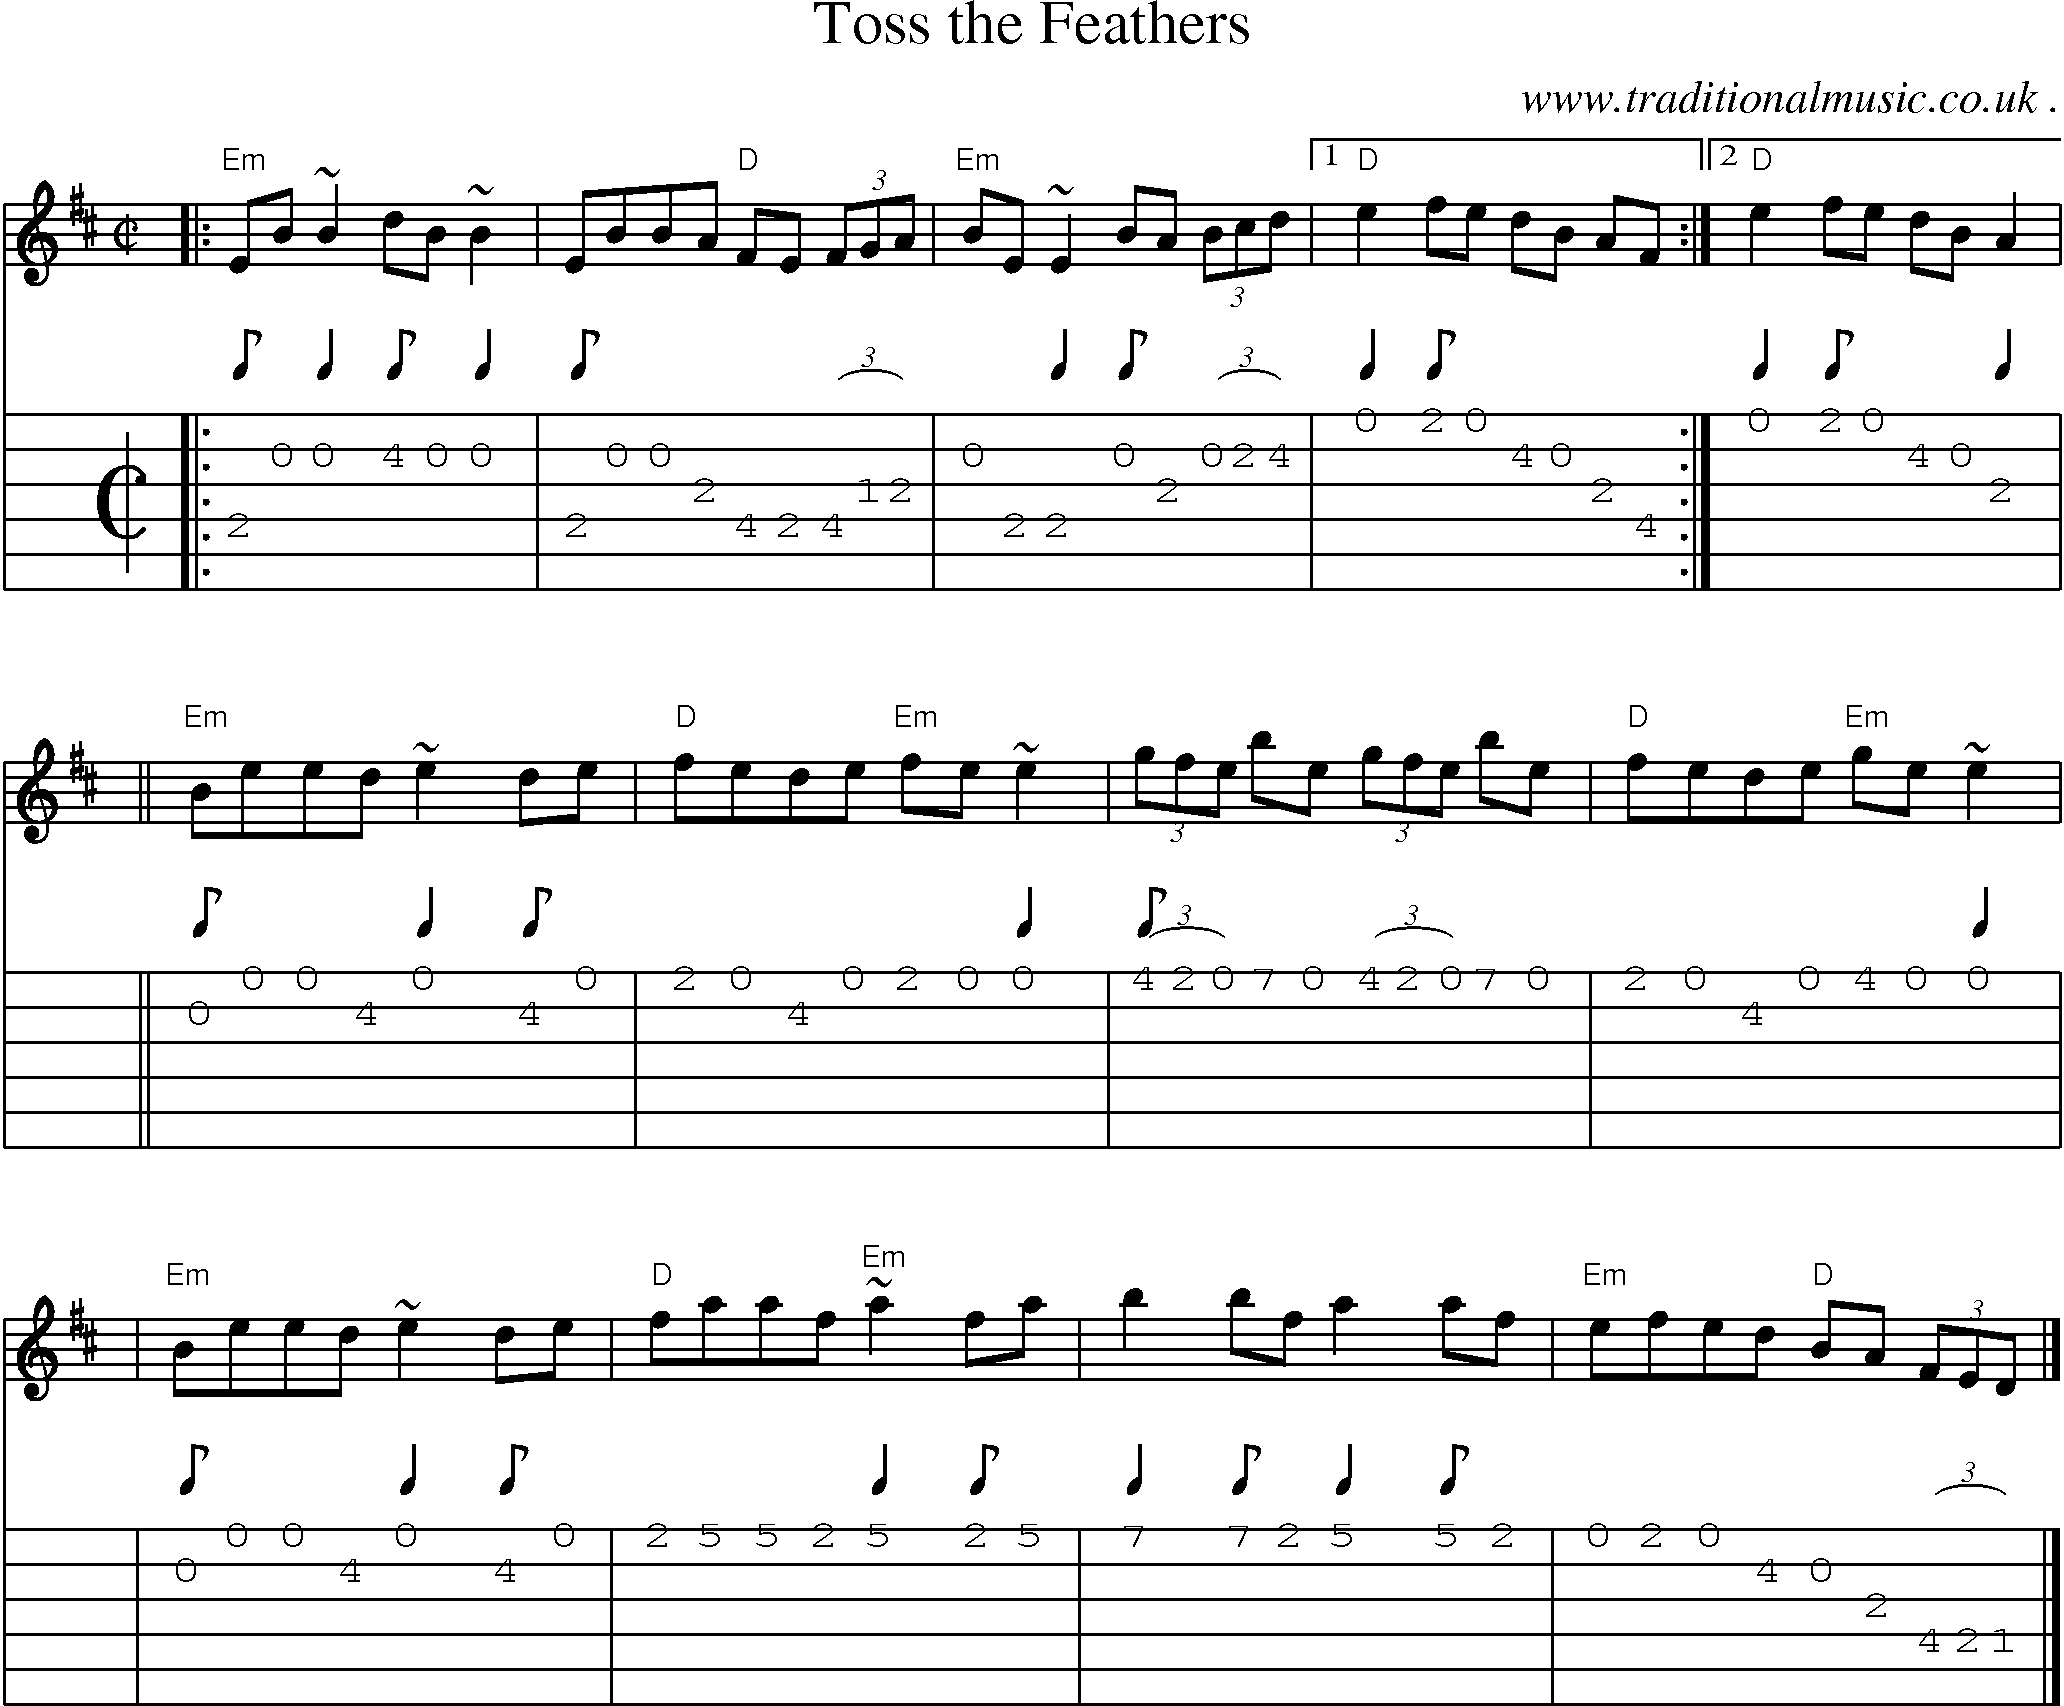 Sheet-music  score, Chords and Guitar Tabs for Toss The Feathers